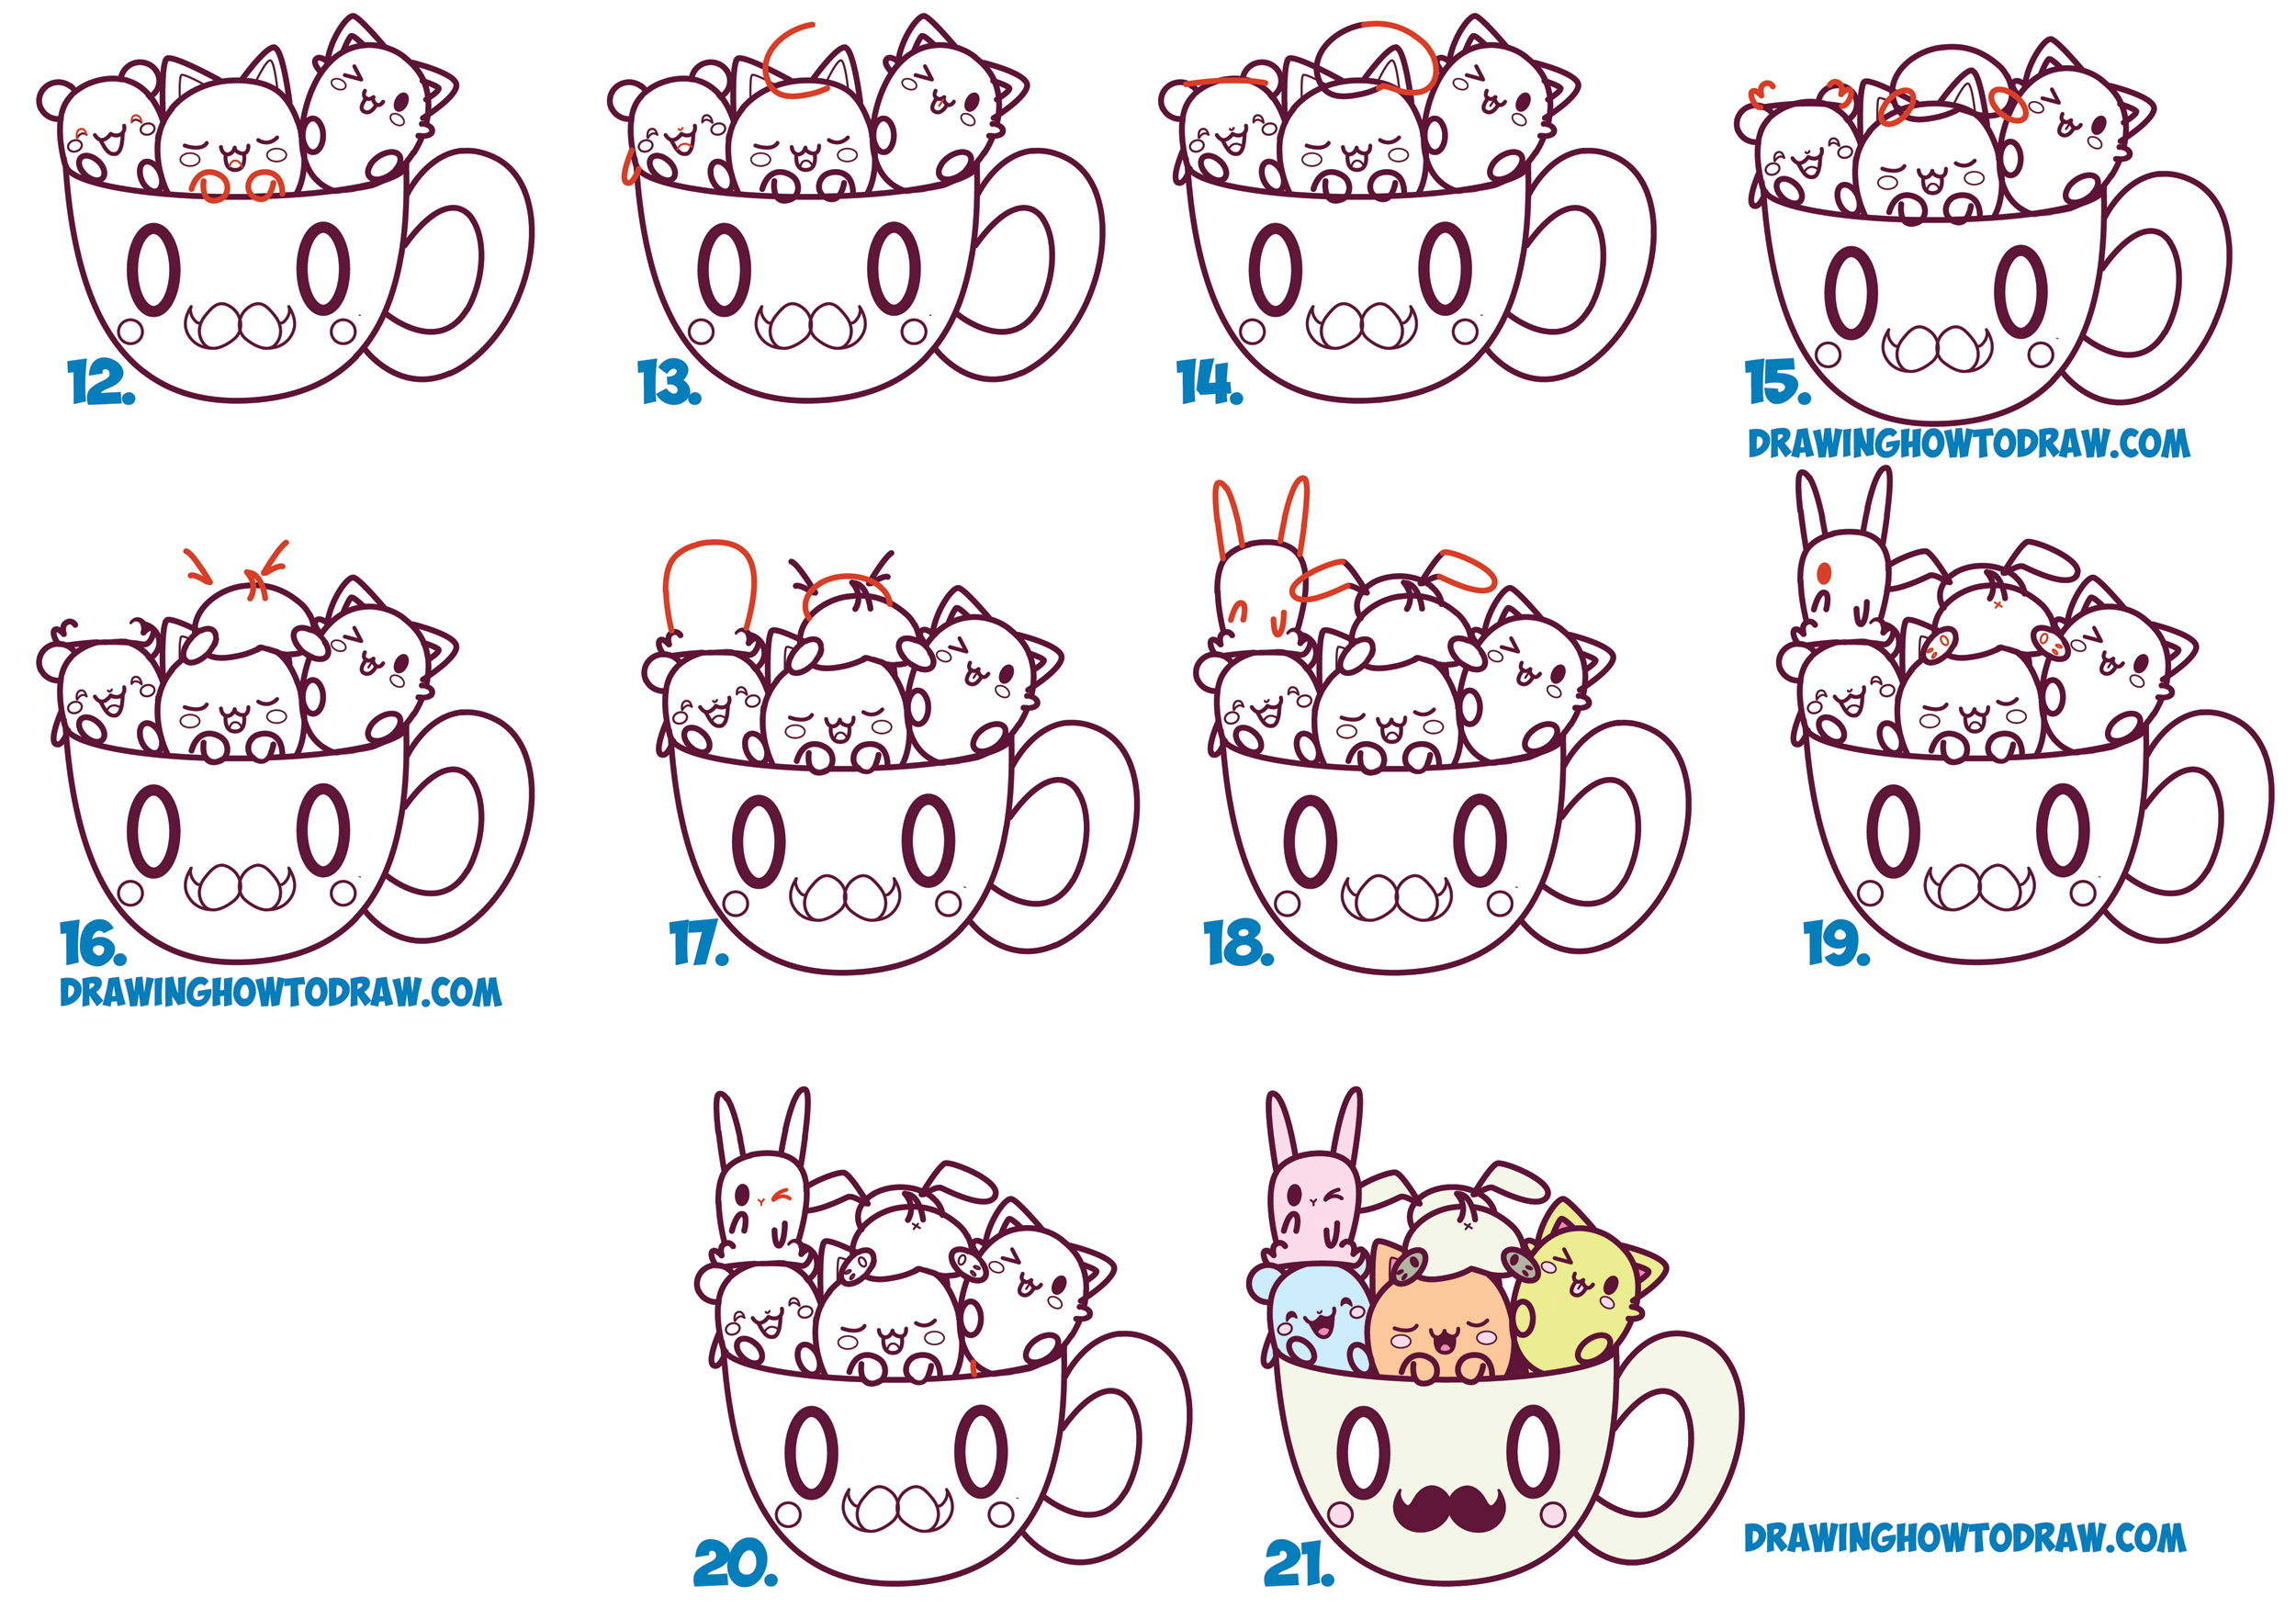 HOW TO DRAW A CUTE CUP DRINK ,STEP BY STEP ,DRAW CUTE THINGS 